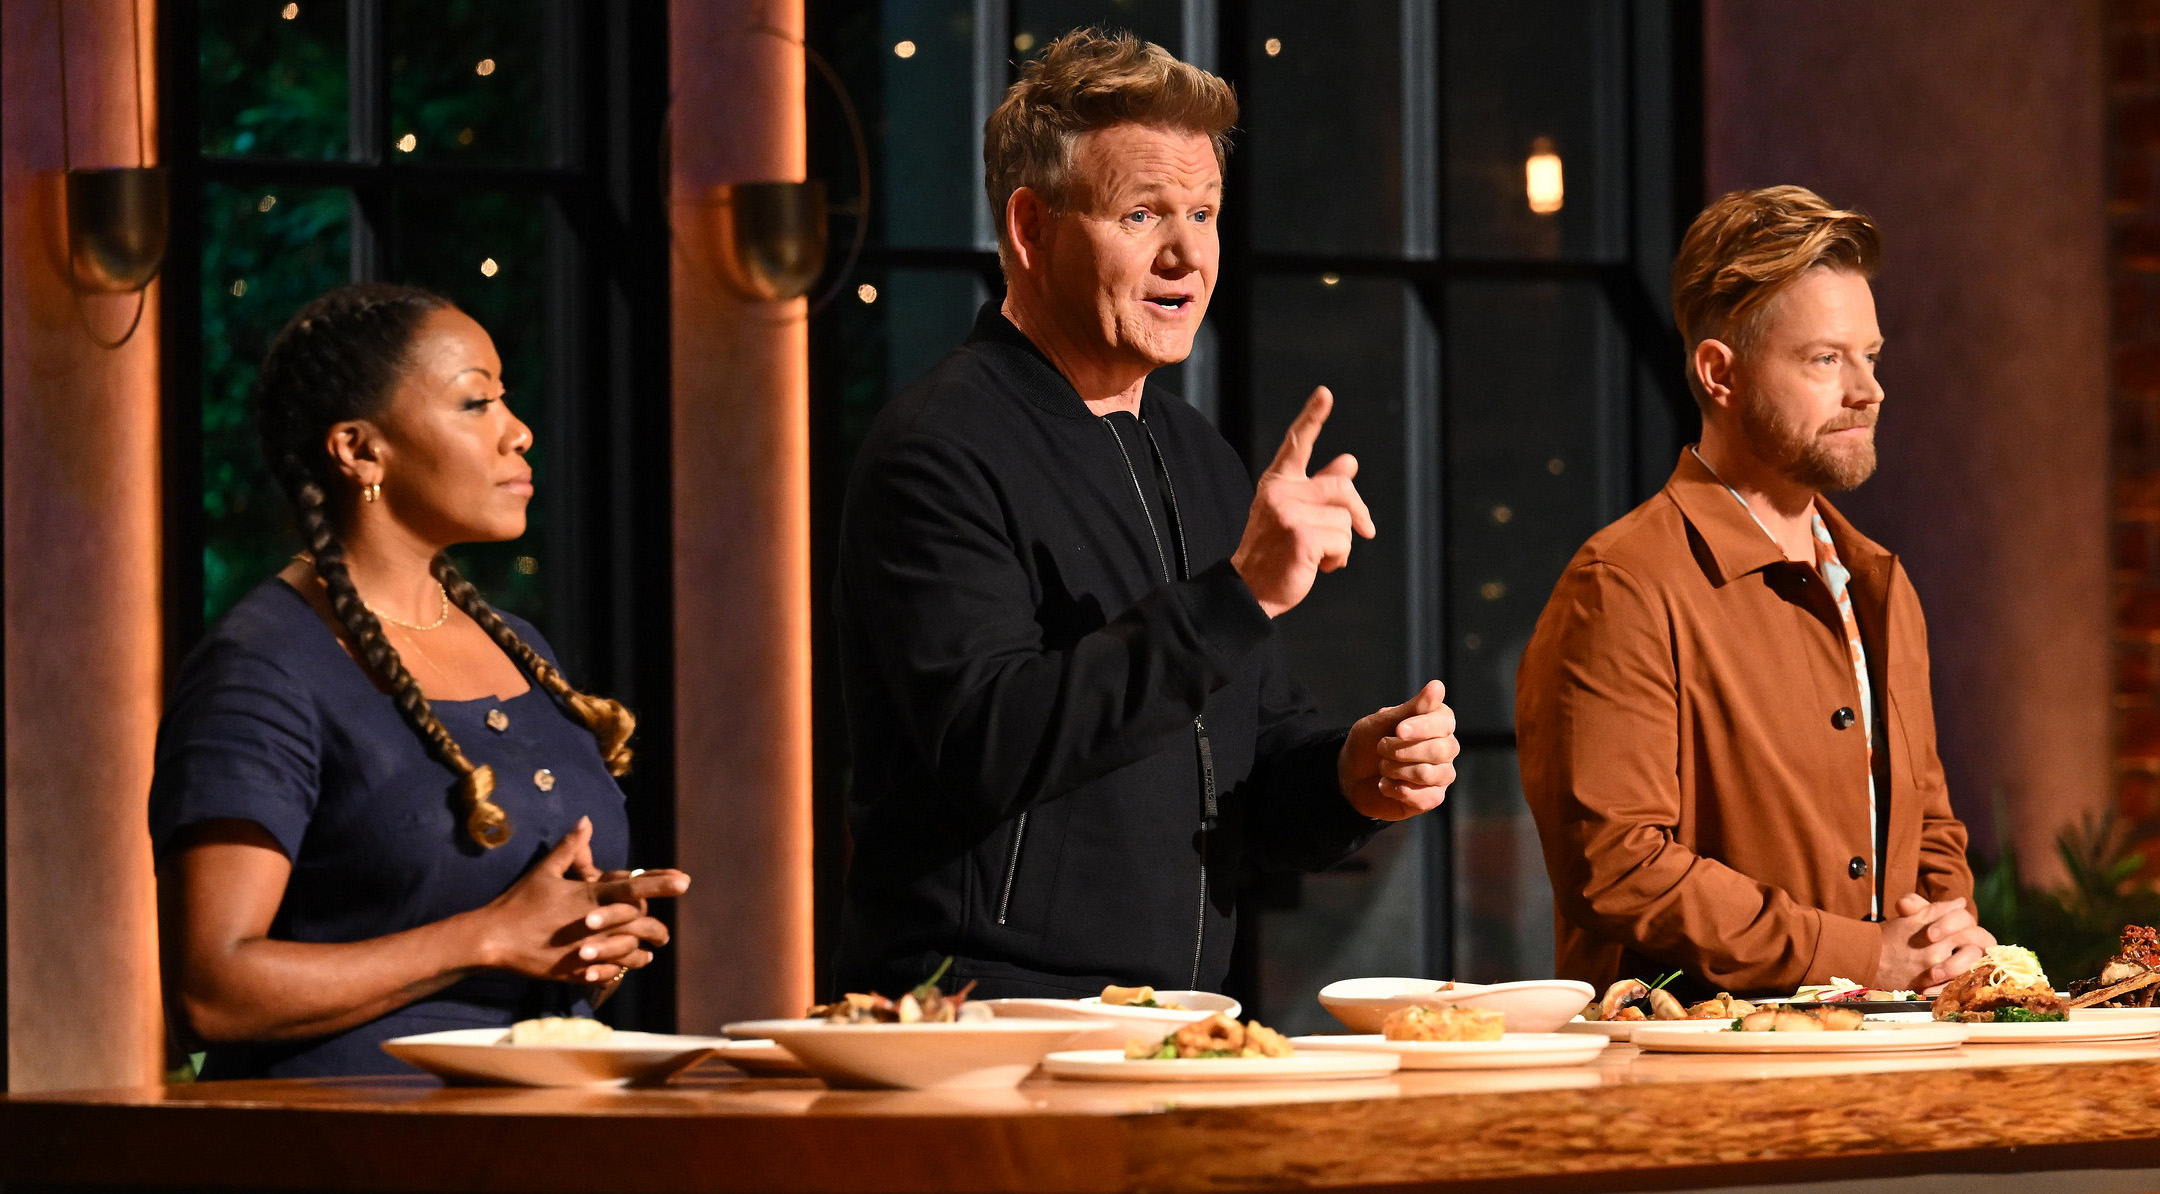 #Next Level Chef: Seasons Three and Four; FOX Renews Cooking Competition Series for Two More Years